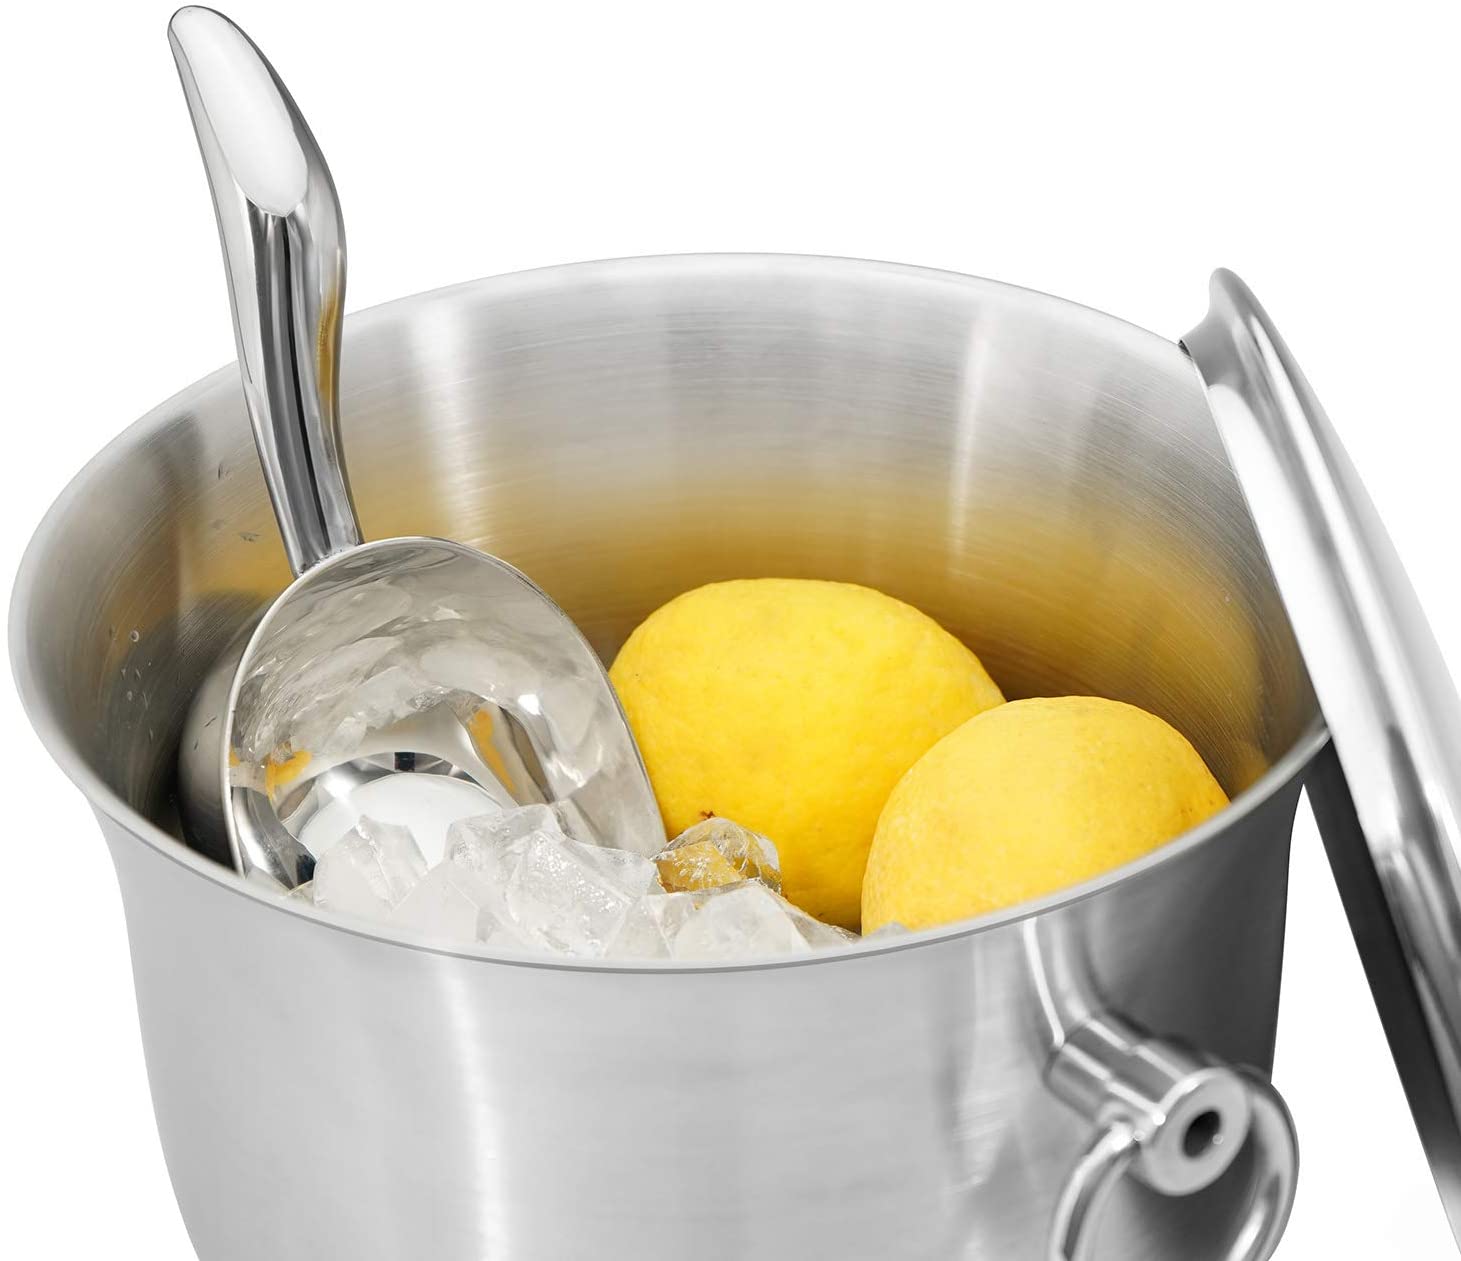 Fortune Candy Insulated Ice Bucket - Double Walled Stainless Steel Ice Bucket with Ice Tongs, Scoop, Lid, and Exclusive Handmade Nylon Holder - 3.3 L